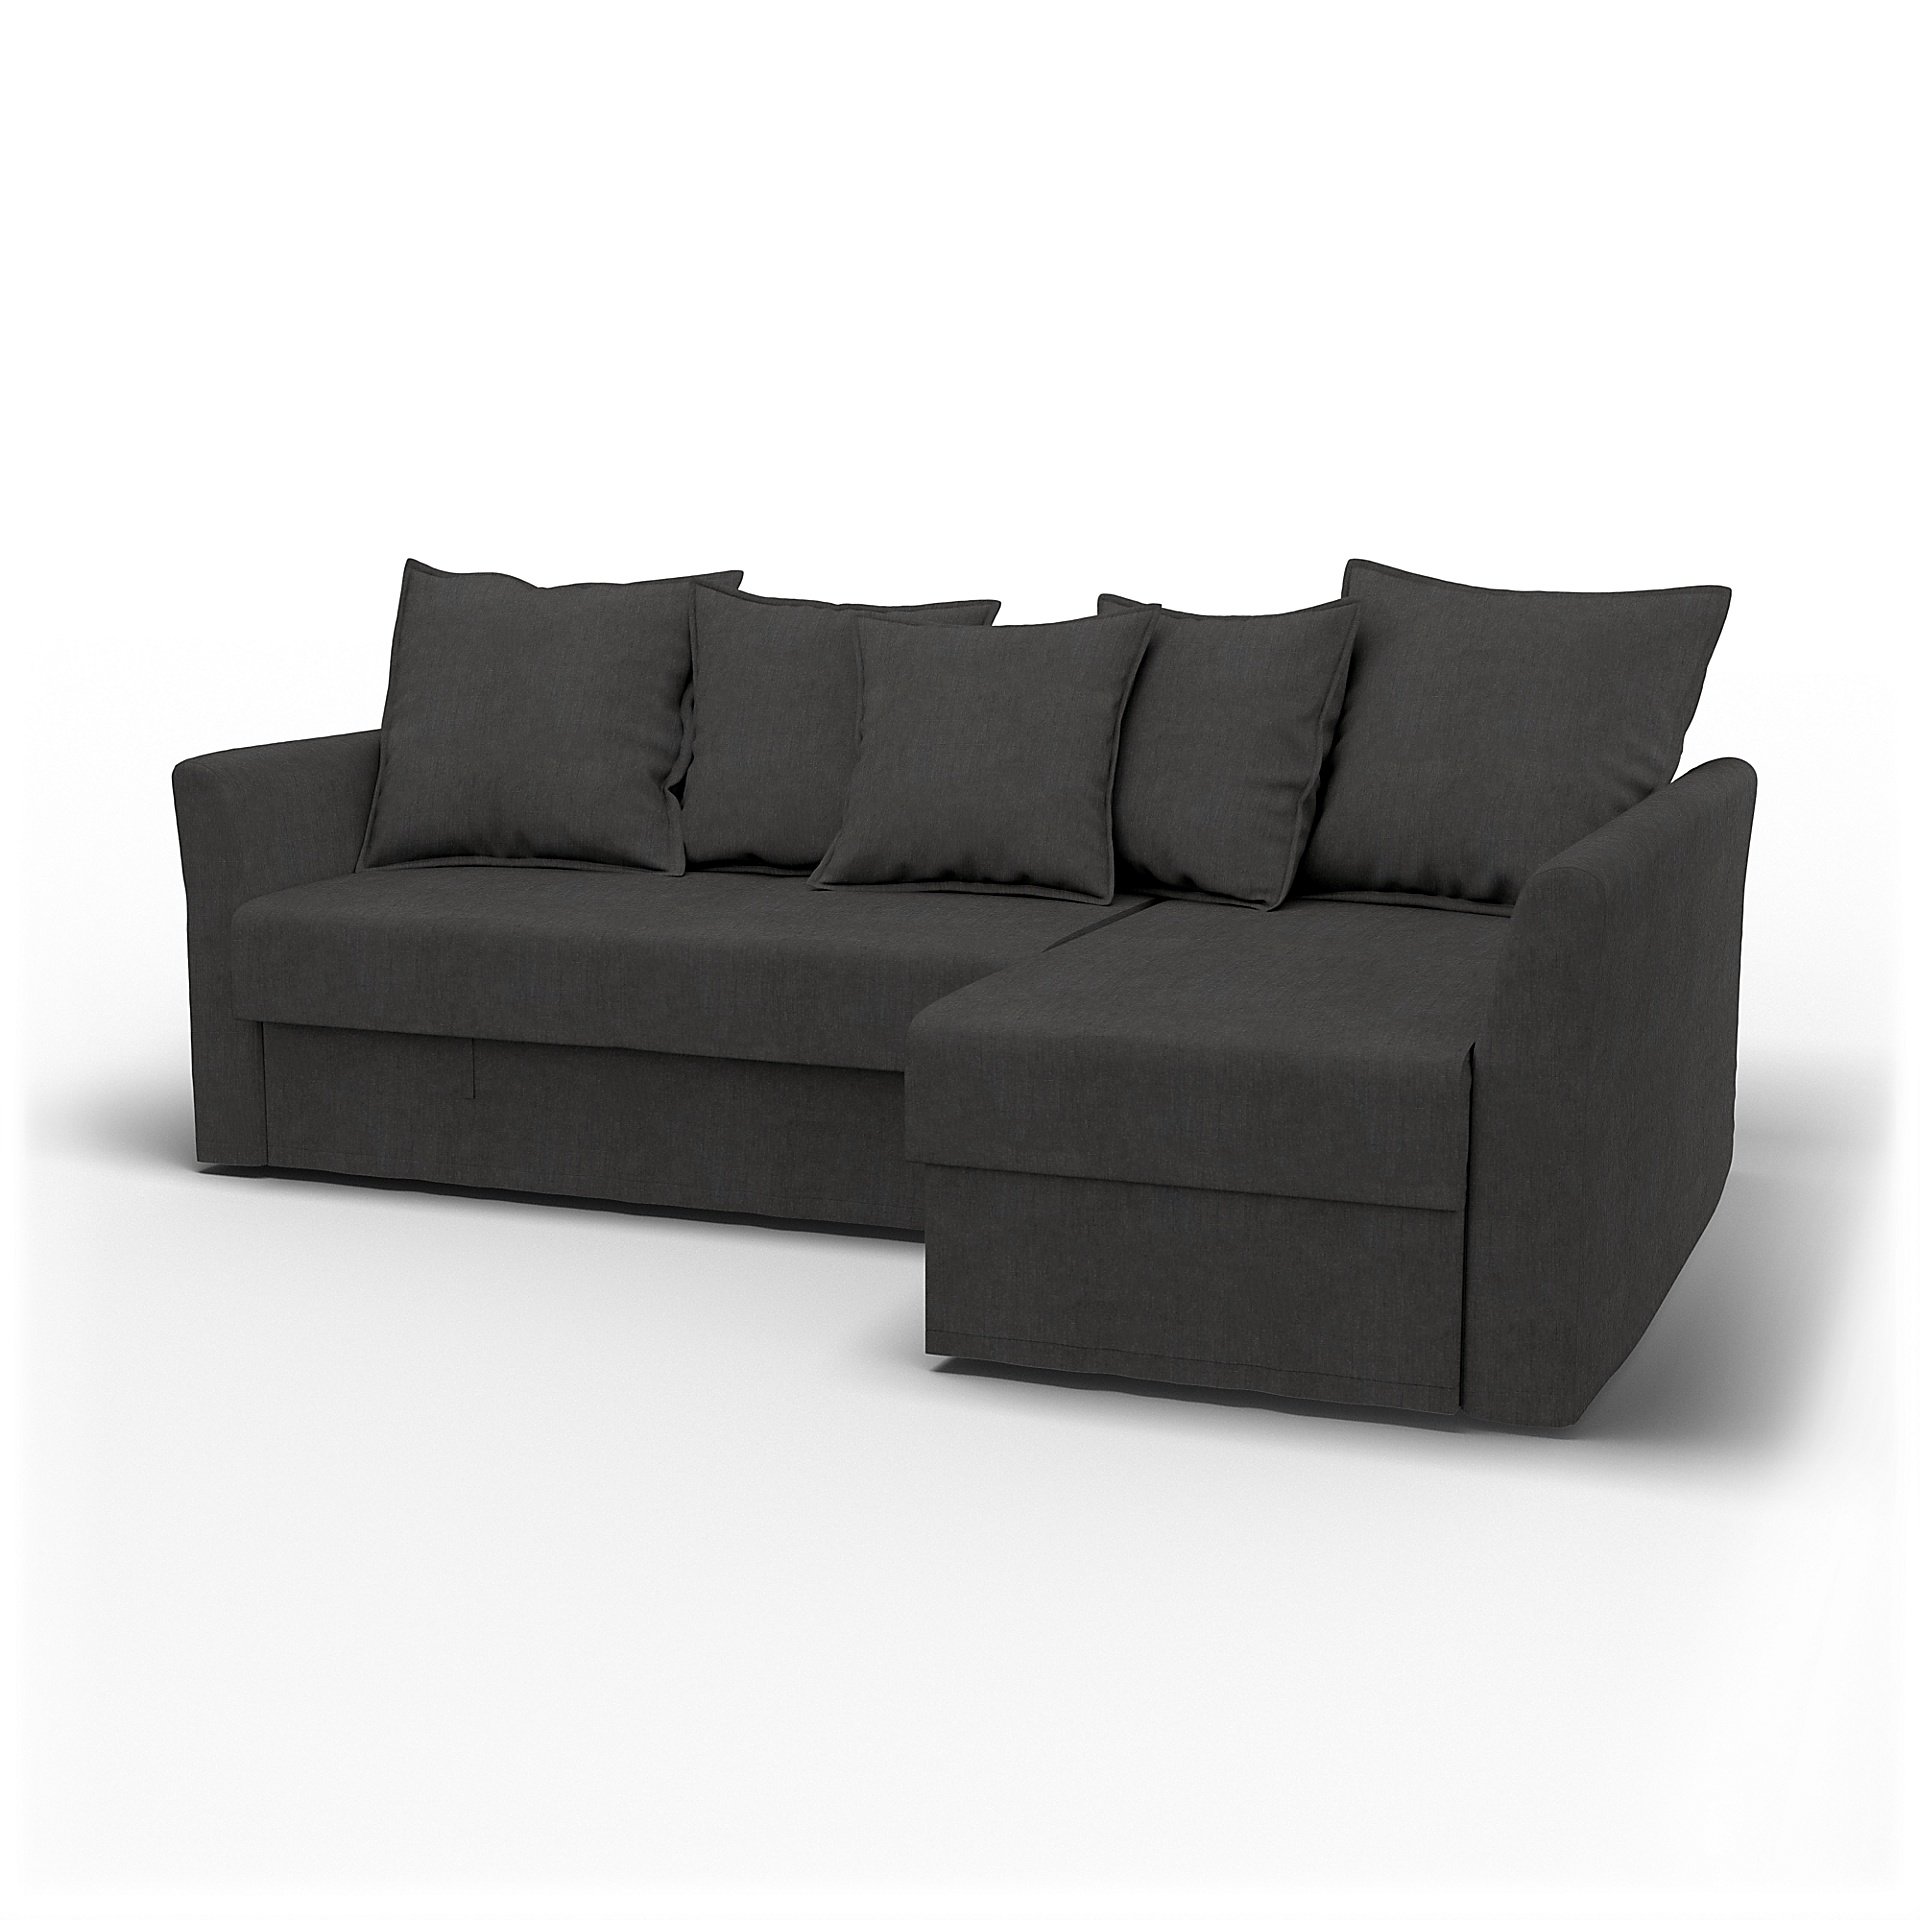 IKEA - Holmsund Sofabed with Chaiselongue, Espresso, Linen - Bemz